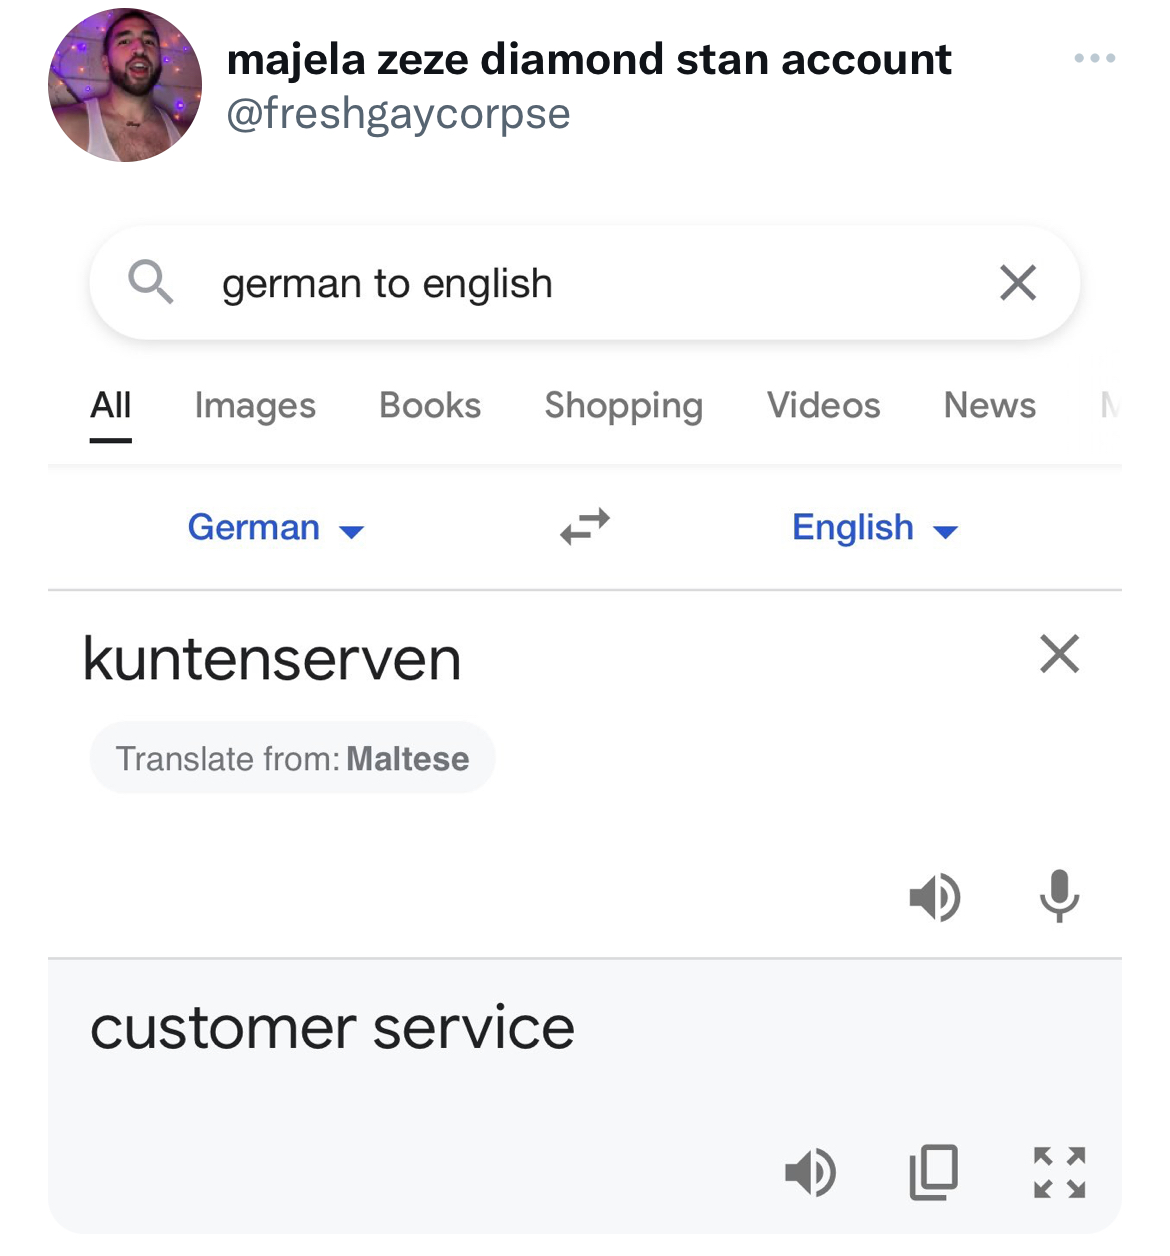 savage tweets to start the week - dirty talk in dutch - All majela zeze diamond stan account german to english Images Books Shopping Videos News German kuntenserven Translate from Maltese customer service X English X Kx Ky M